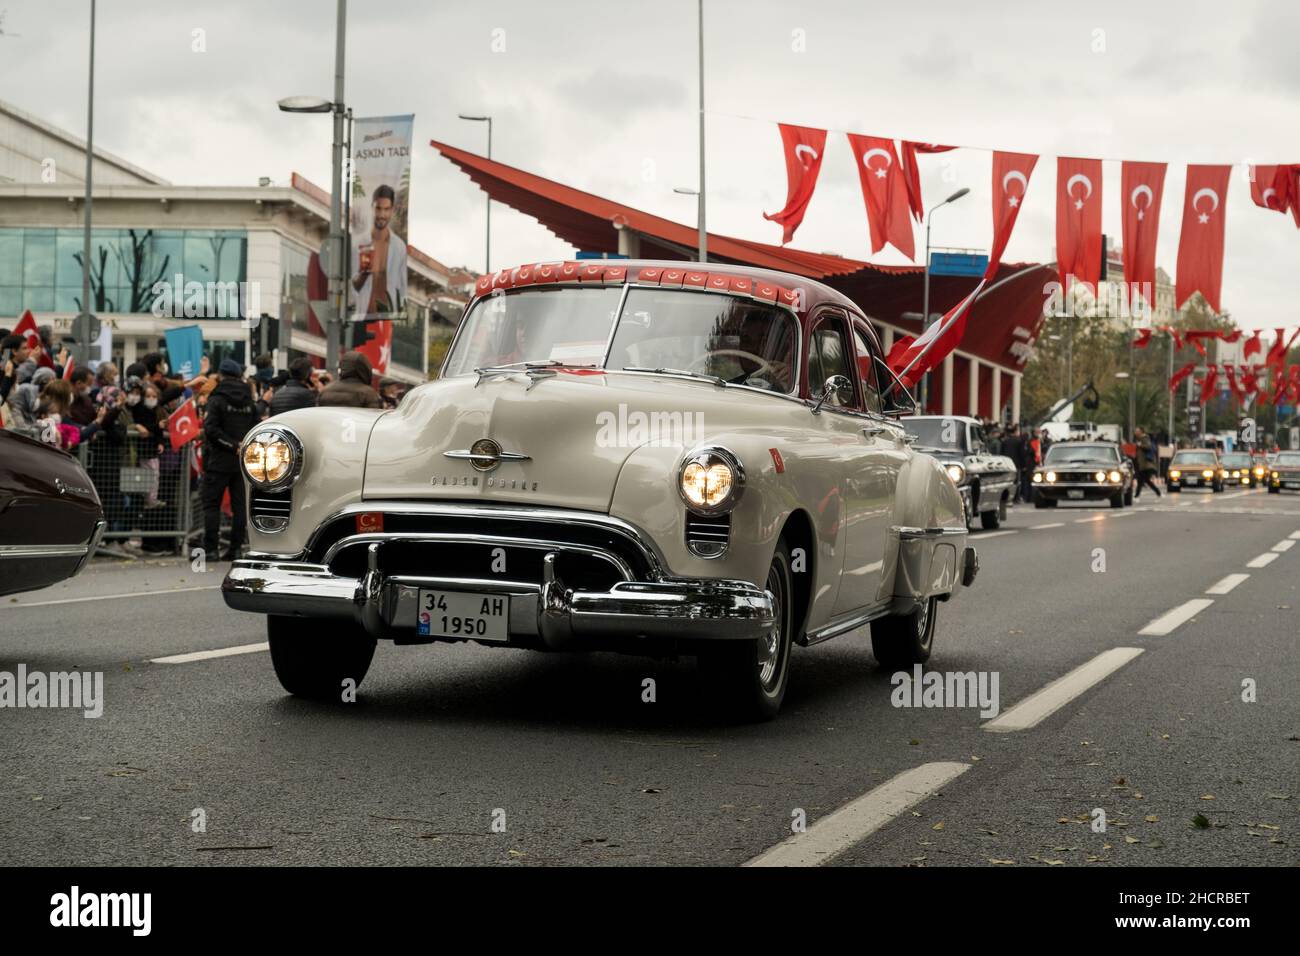 Istanbul, Turkey - October 29, 2021: A white 1950 Oldsmobile rocket 88 parade on October 29 republic day of Turkey, Classic car parade moment. Stock Photo